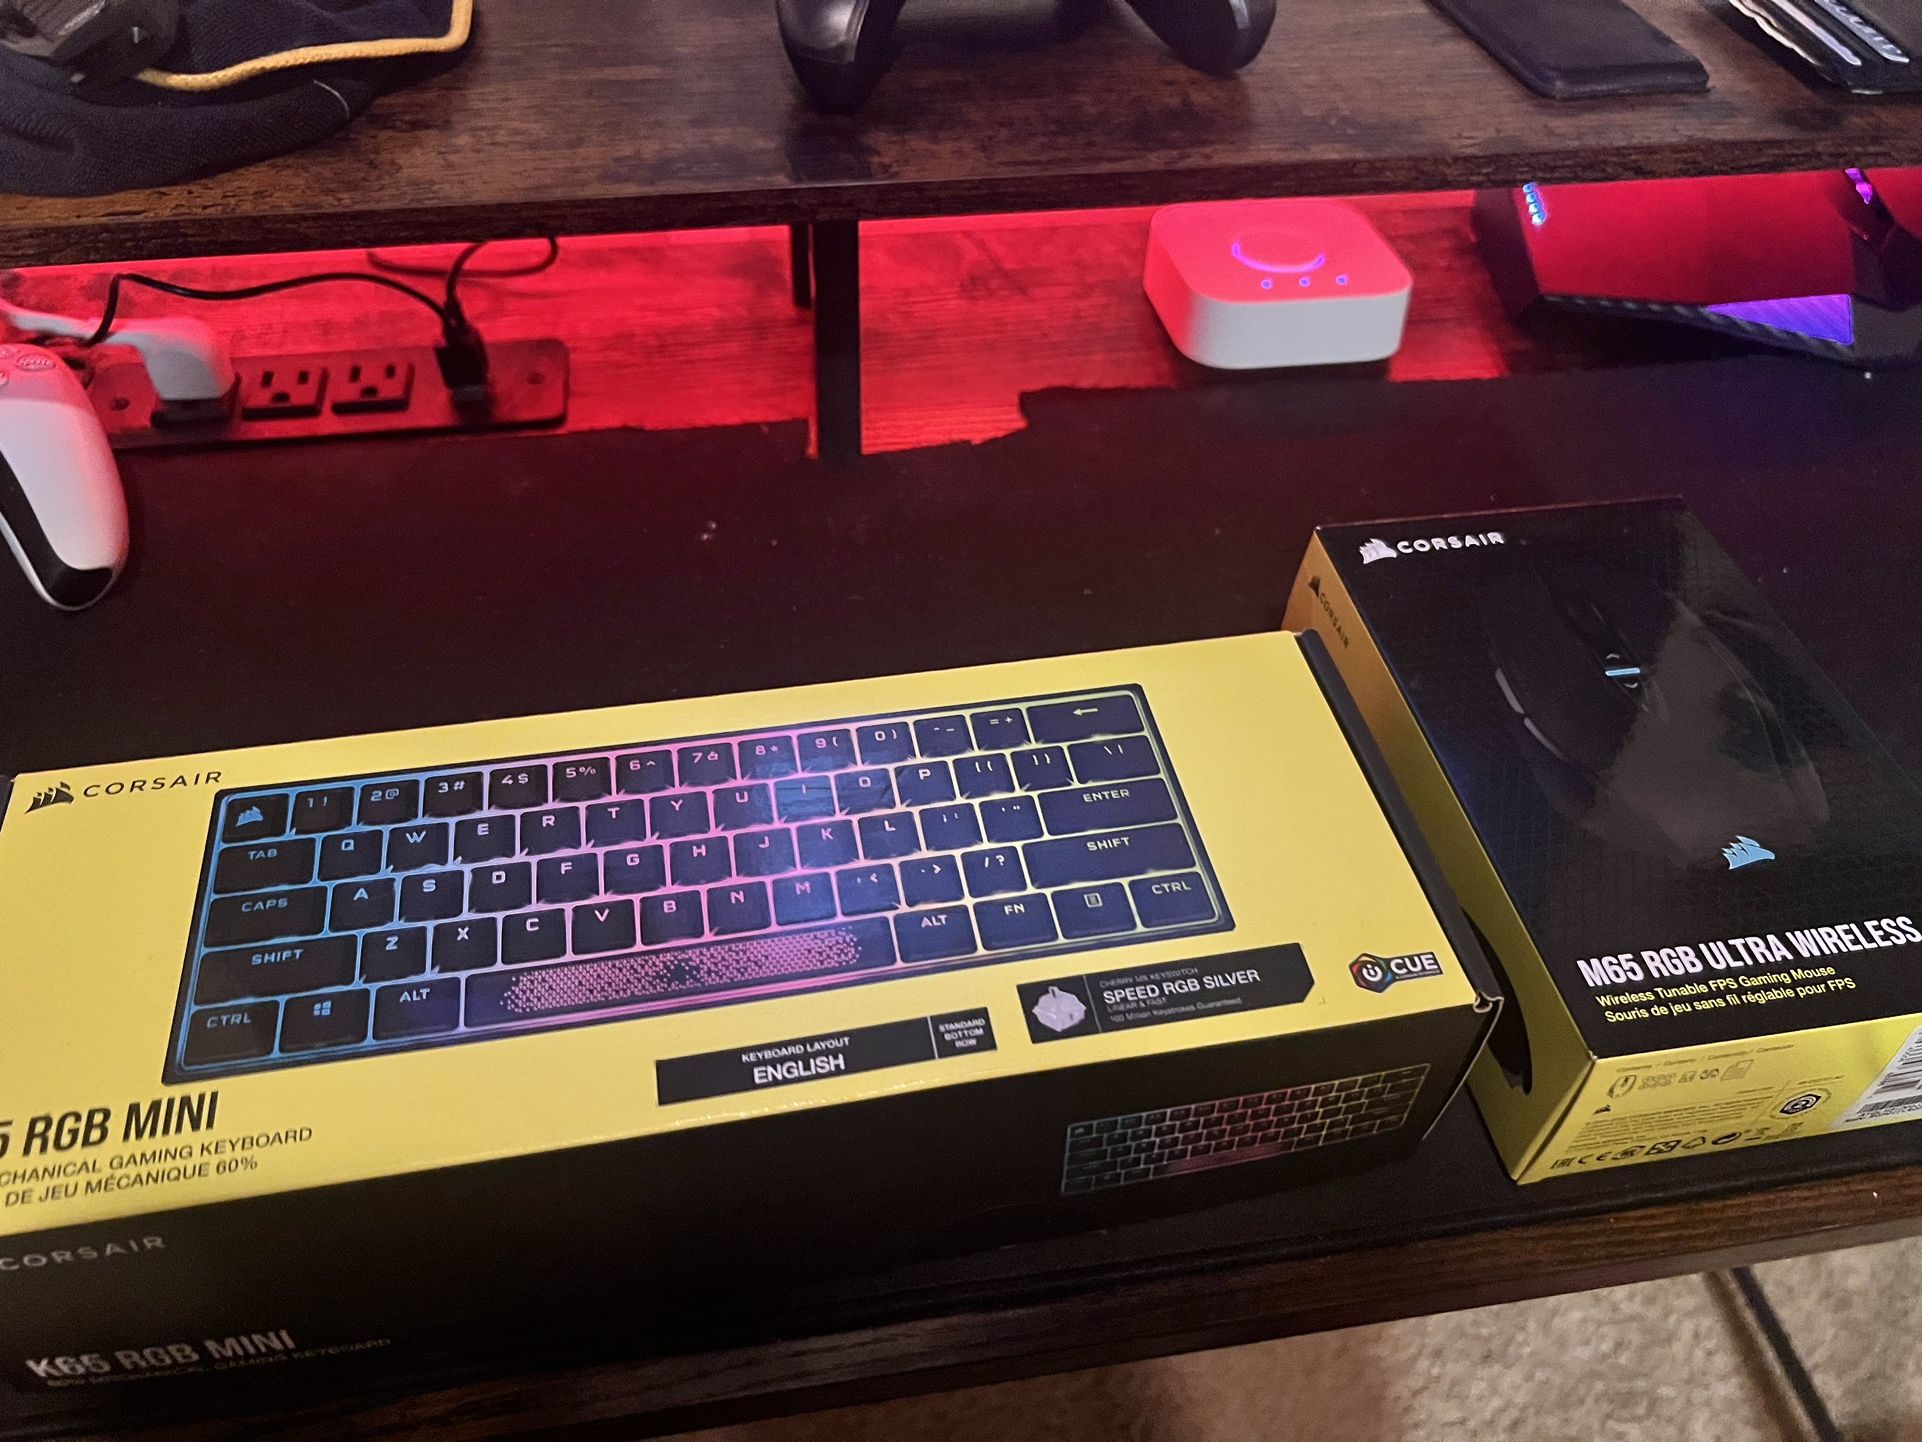 Corsair RGB Gaming Mouse And Keyboard In Box 